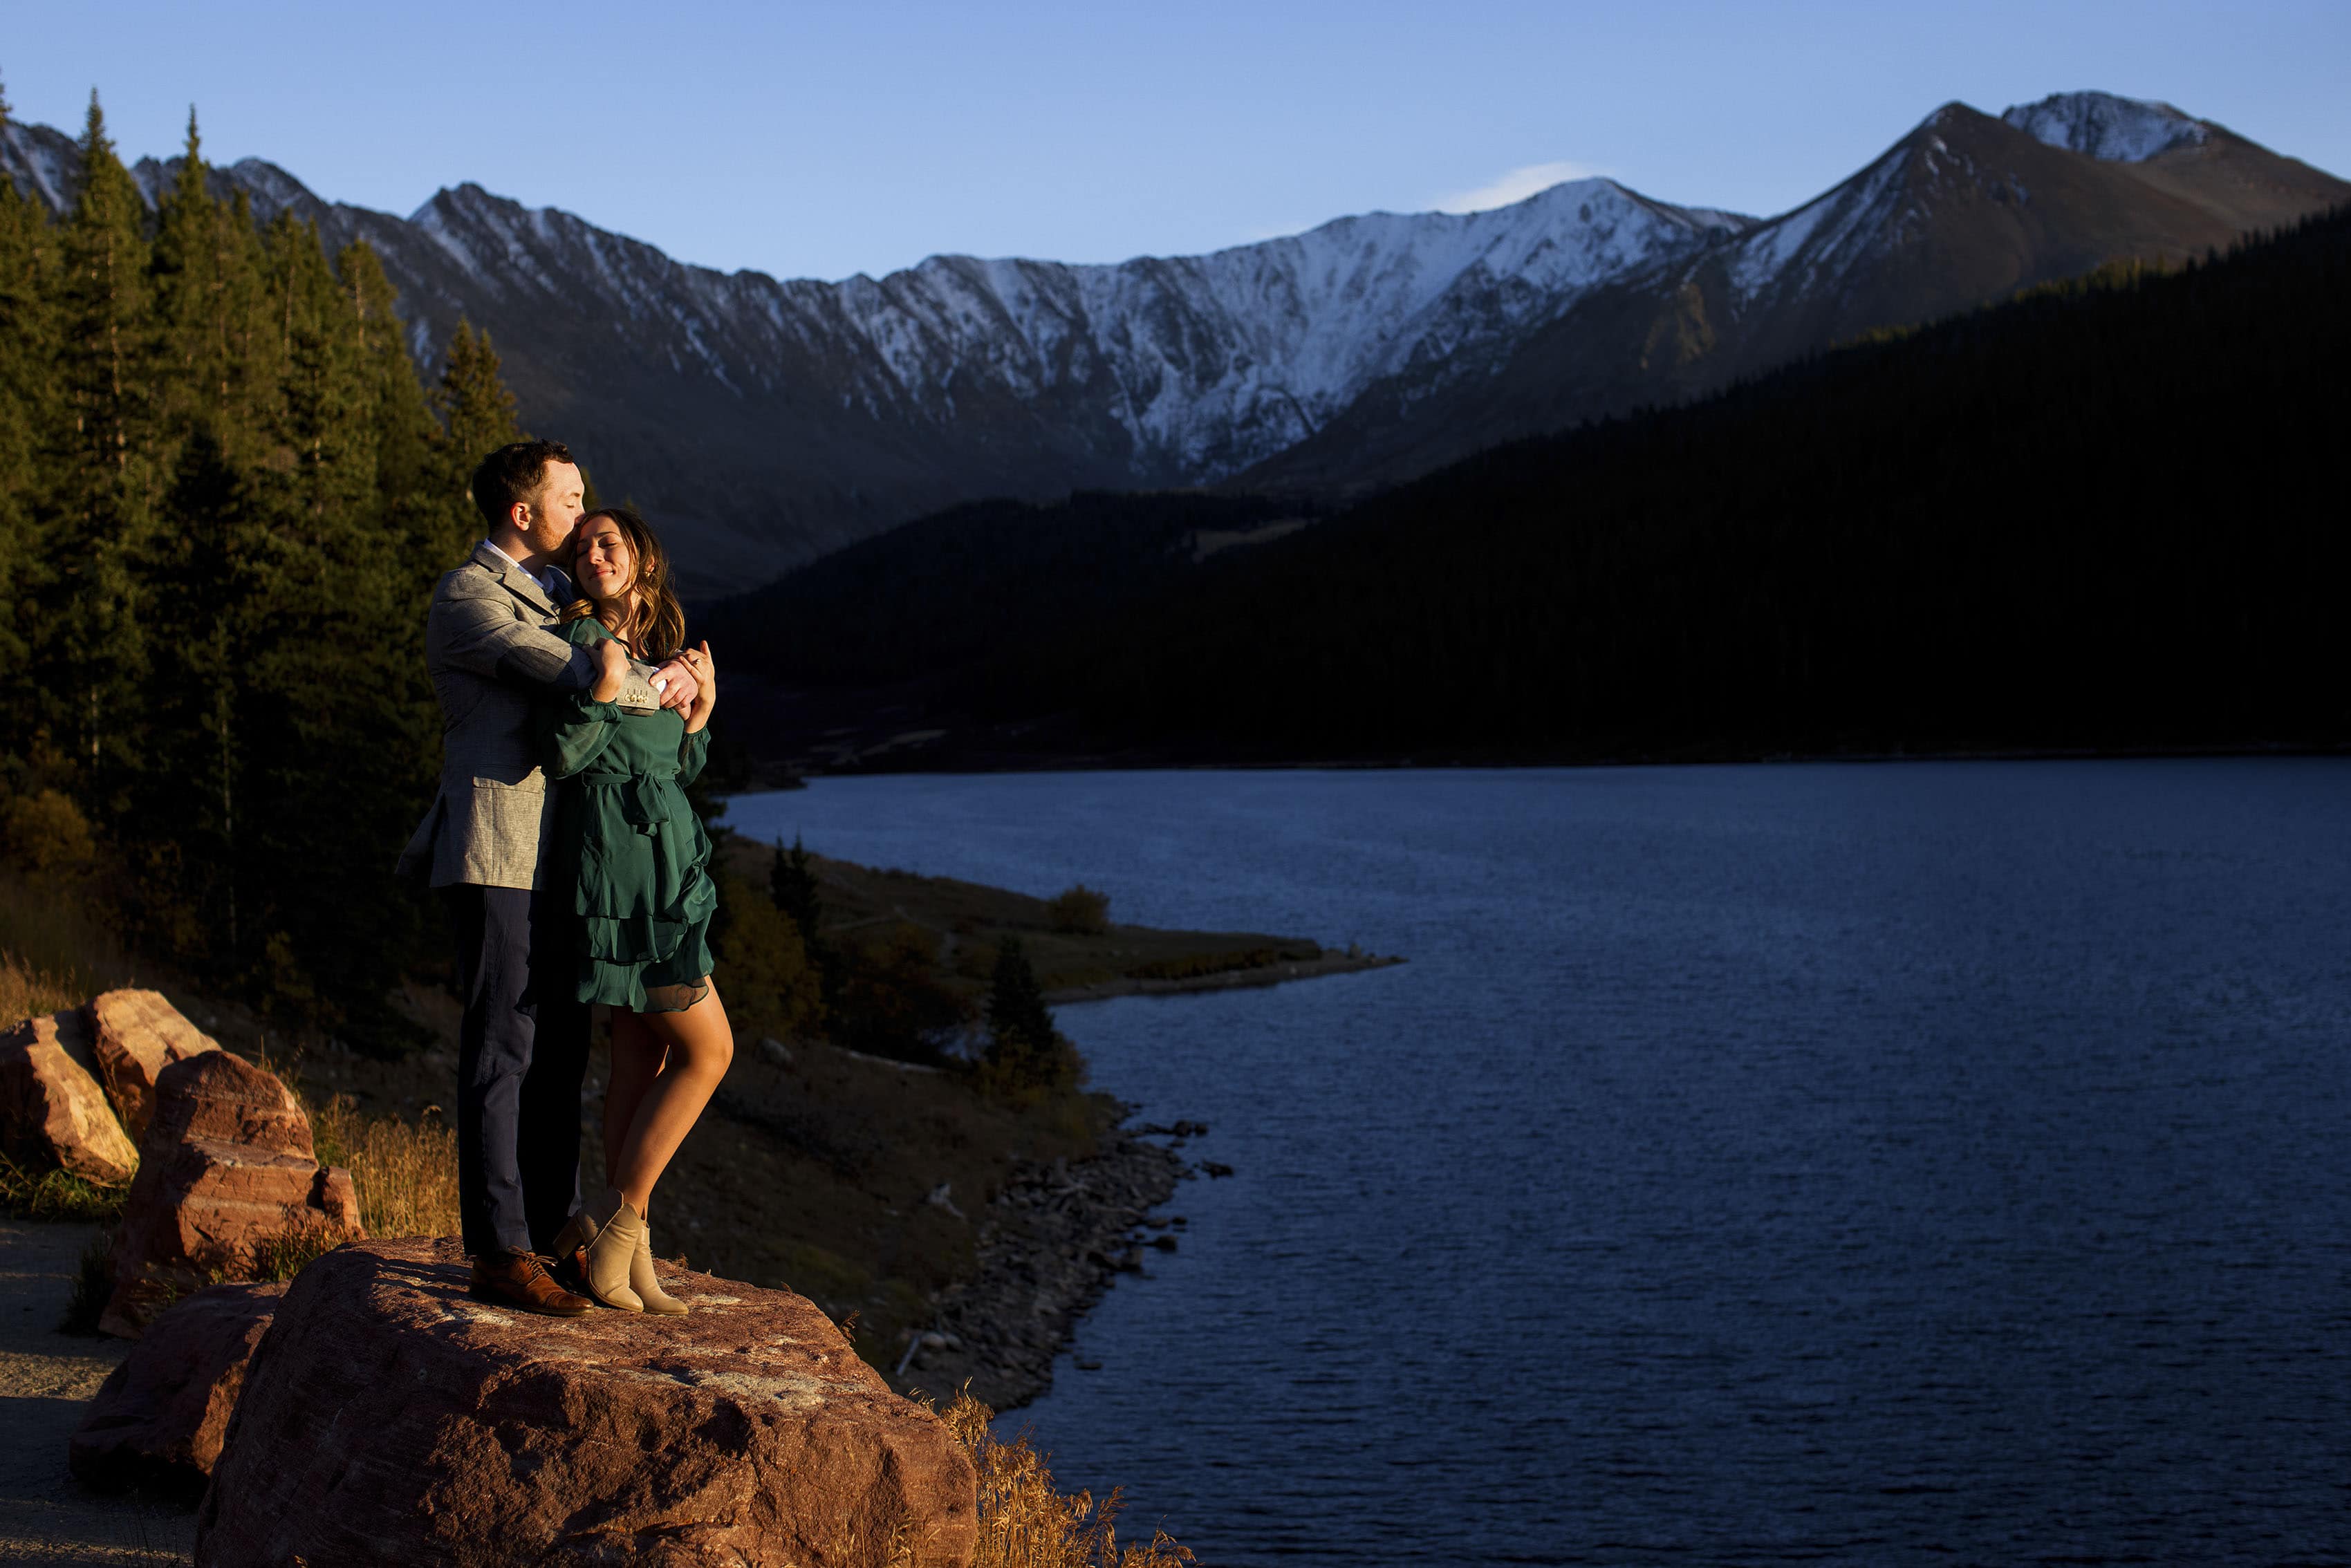 Gavin kisses Caitlin as they stand on a rock during their engagement photos at Clinton Gulch Dam Reservoir